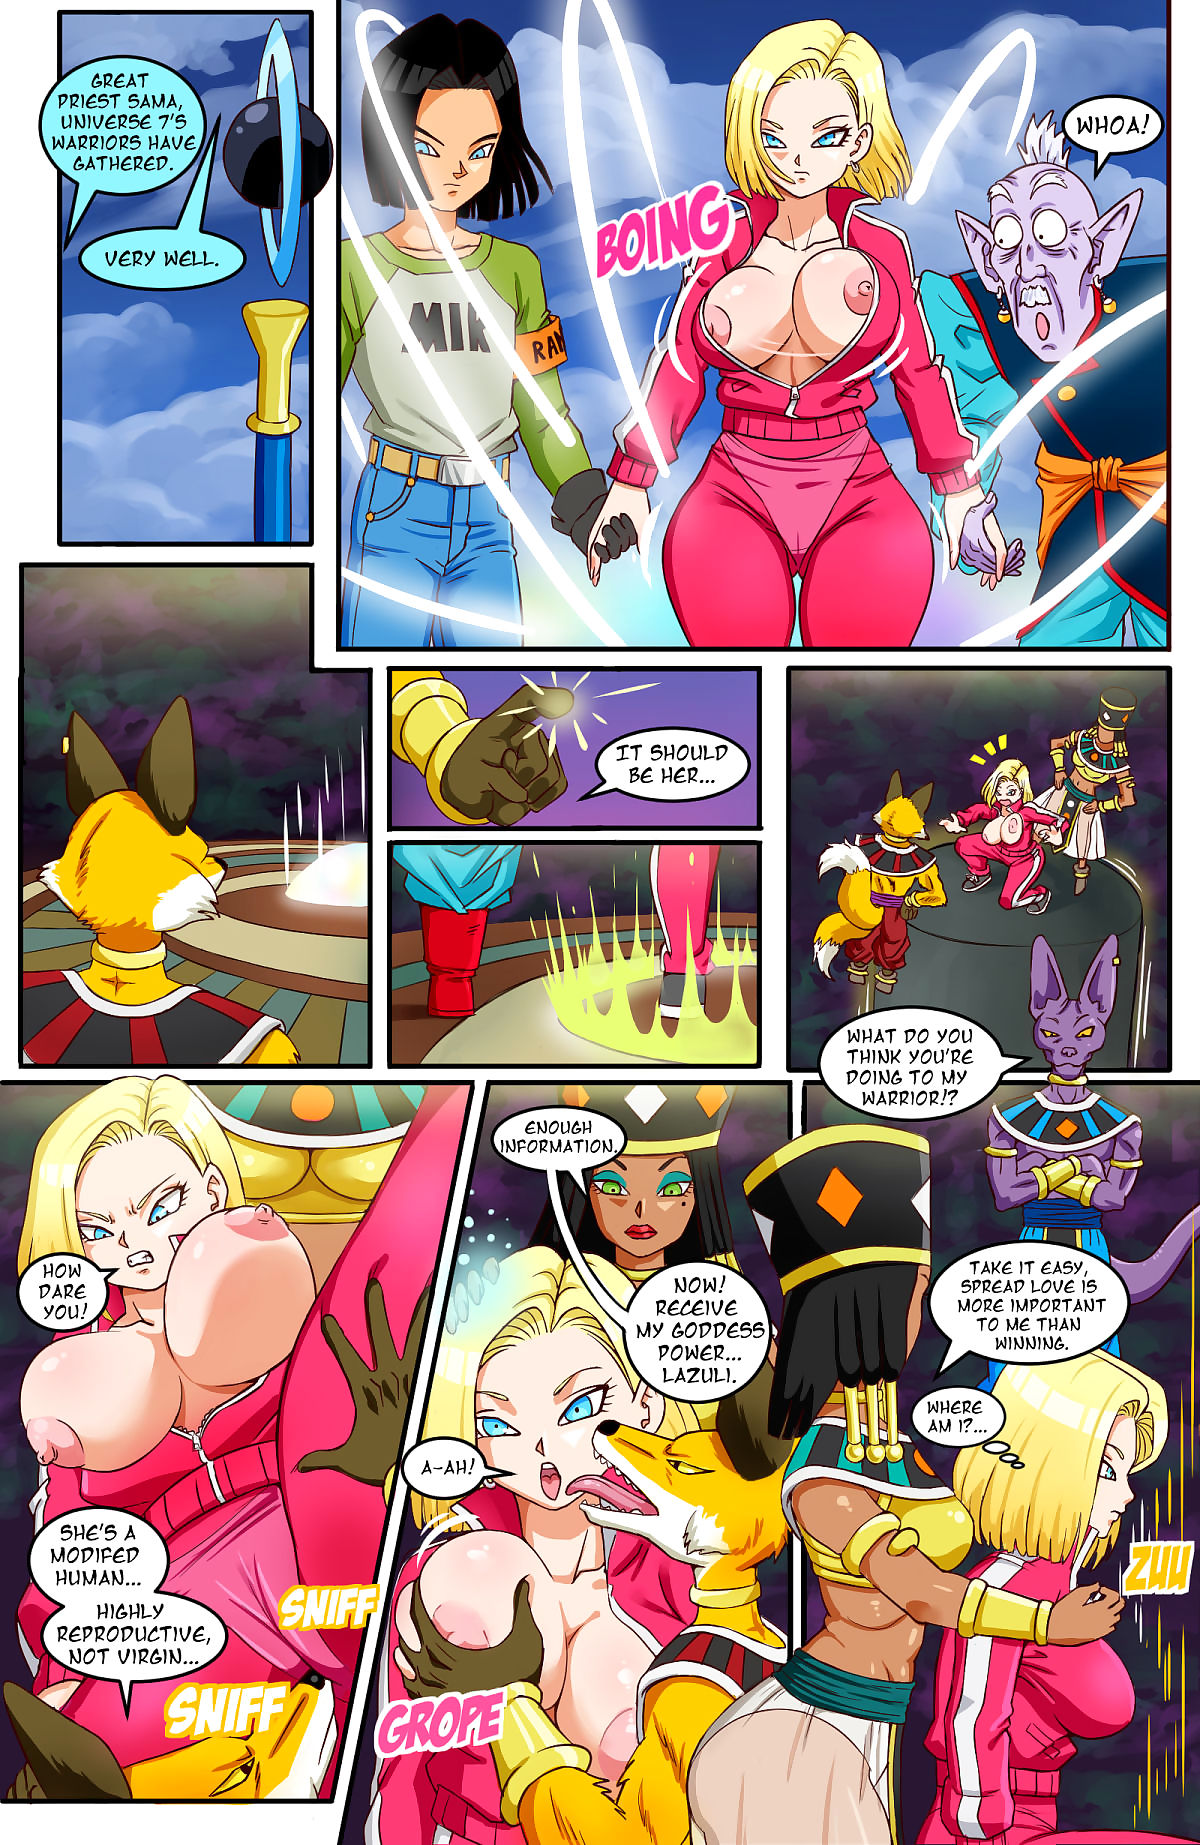 PinkPawg Dragon Ball Super- The Goddess of Universe 7 page 1